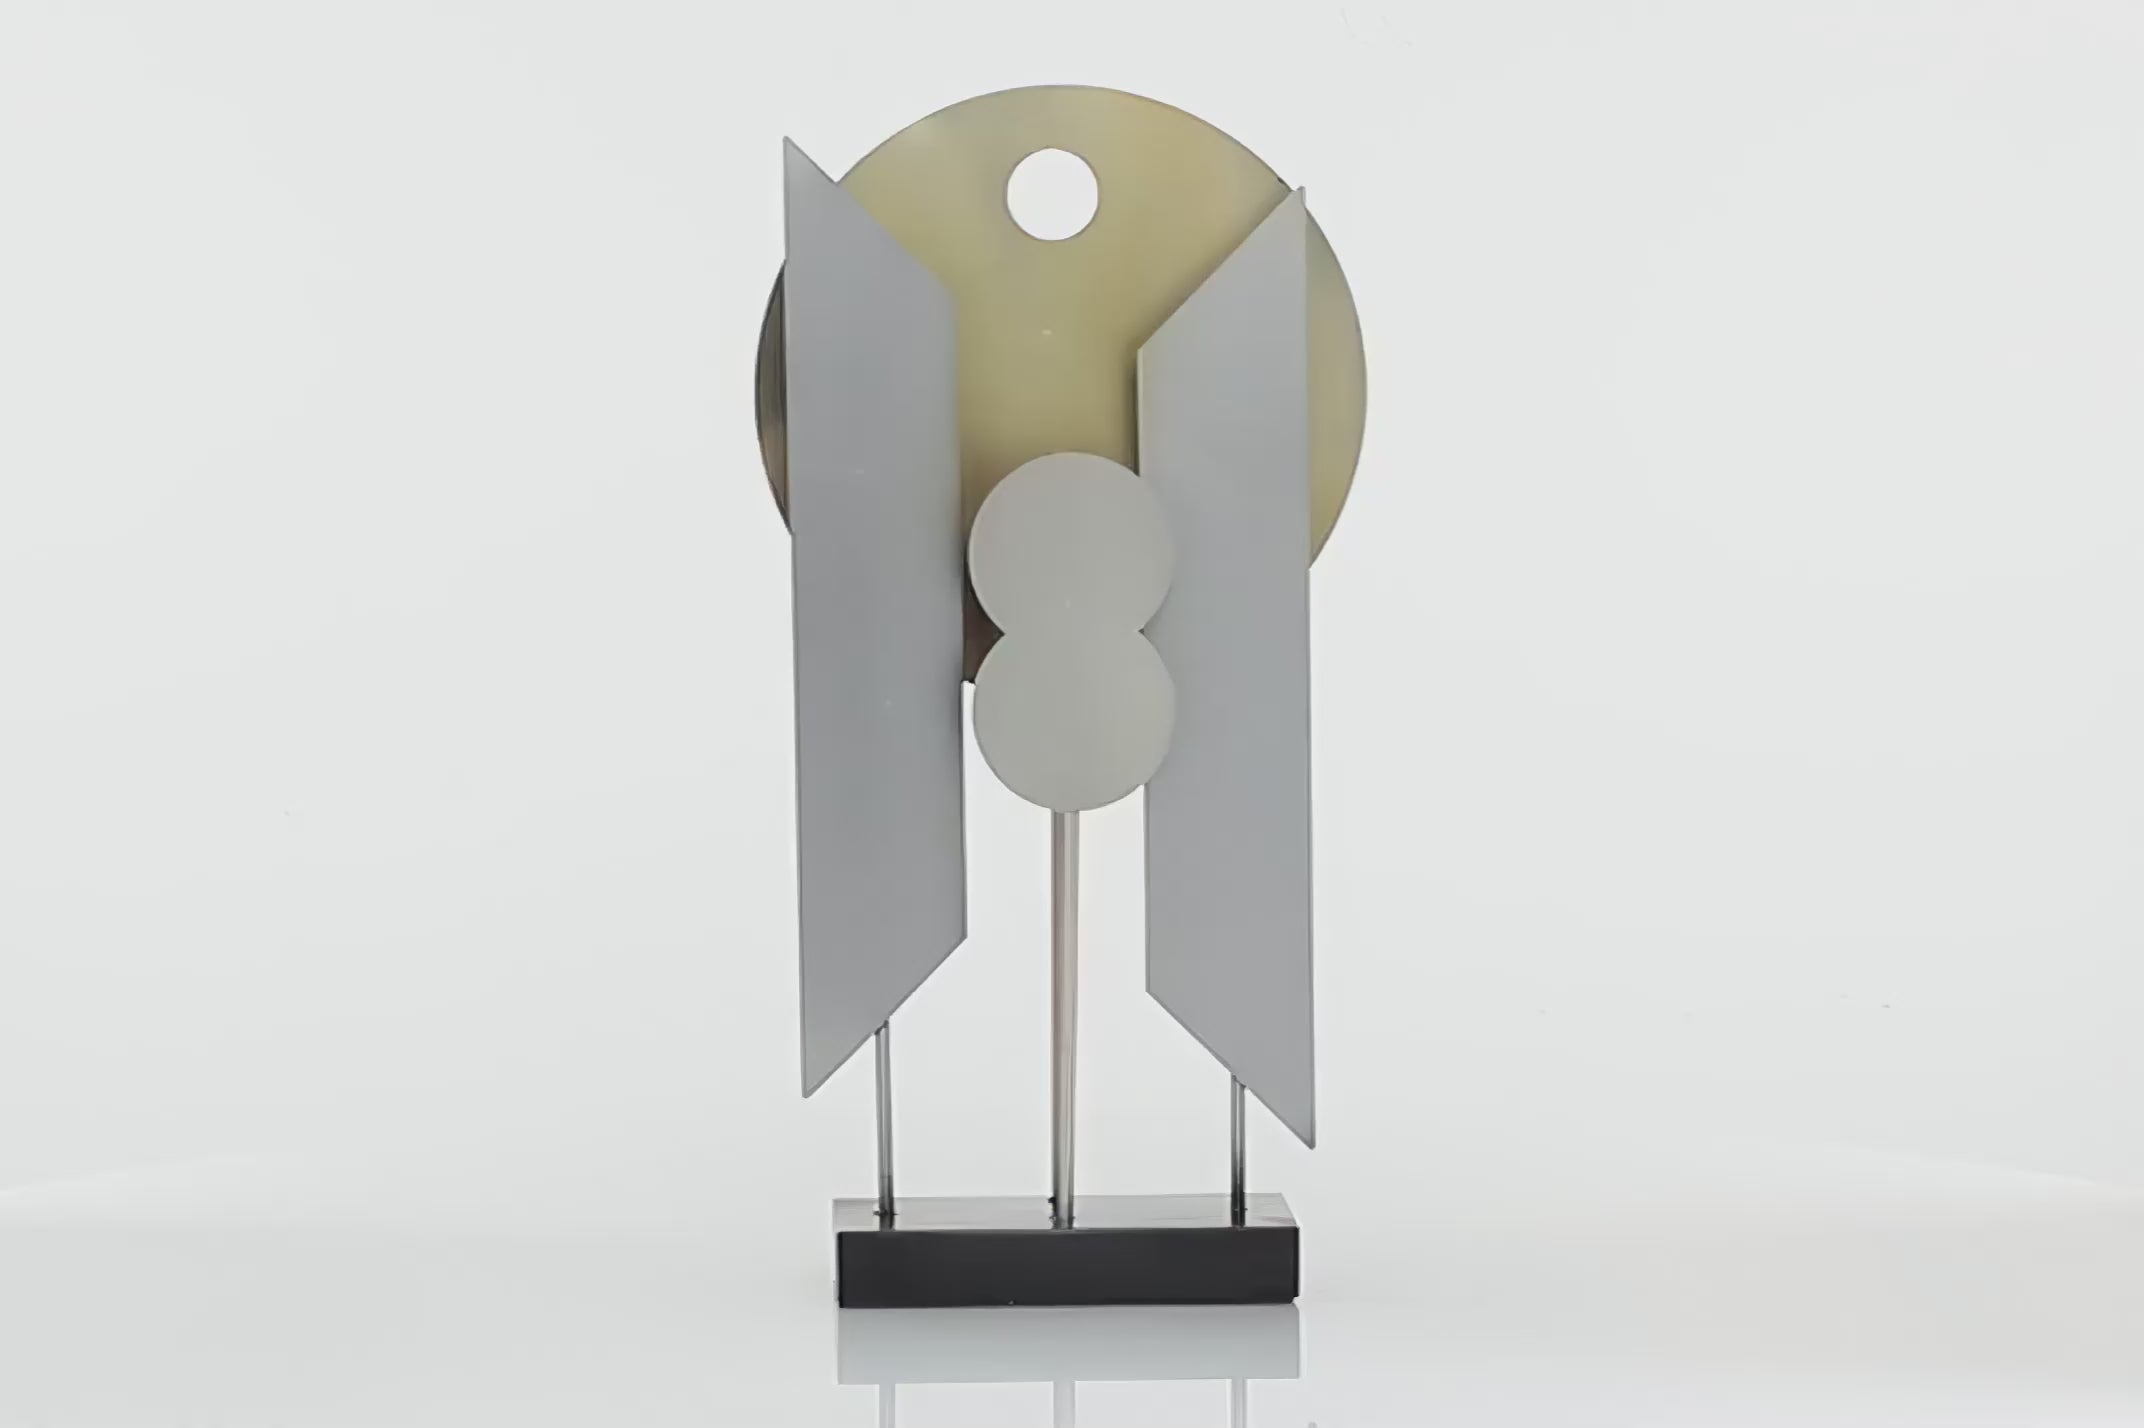 Grey and gold colored abstract aluminum figurine. Sculpture has a Gold circle and two grey parts that look wings. Figurine is spinning in 360 degrees and has a black wooden stand. Back ground is white.